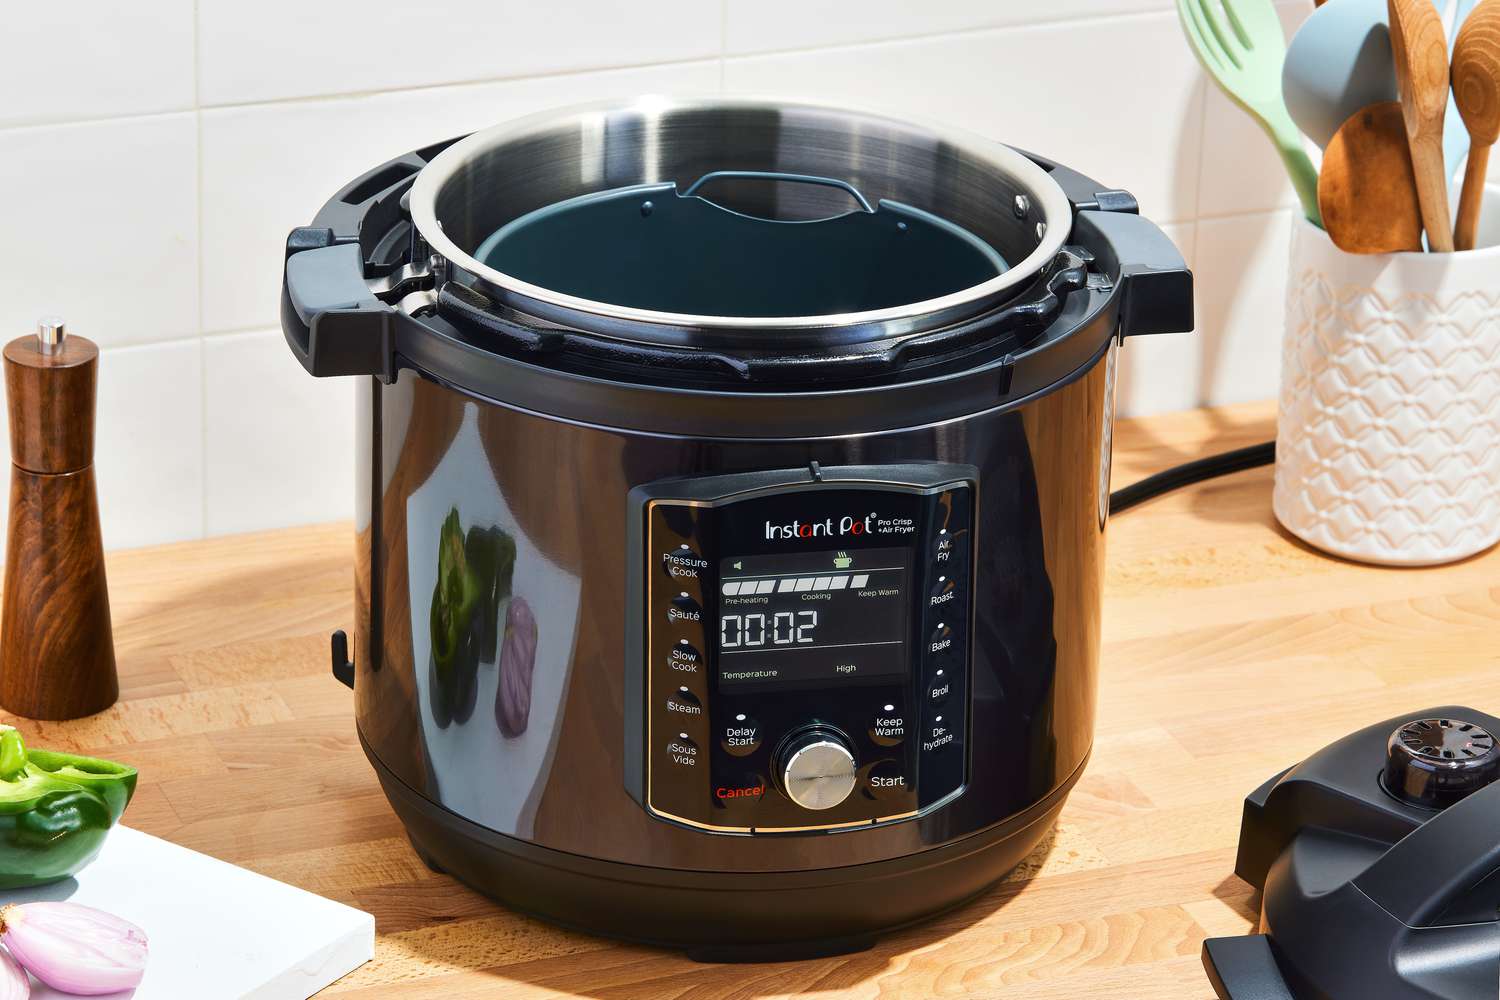 Instant Pot Pro Crisp & Air Fryer 8-Quart Multi-Use Pressure Cooker and Air Fryer displayed on a wooden countertop next to a utensil stand